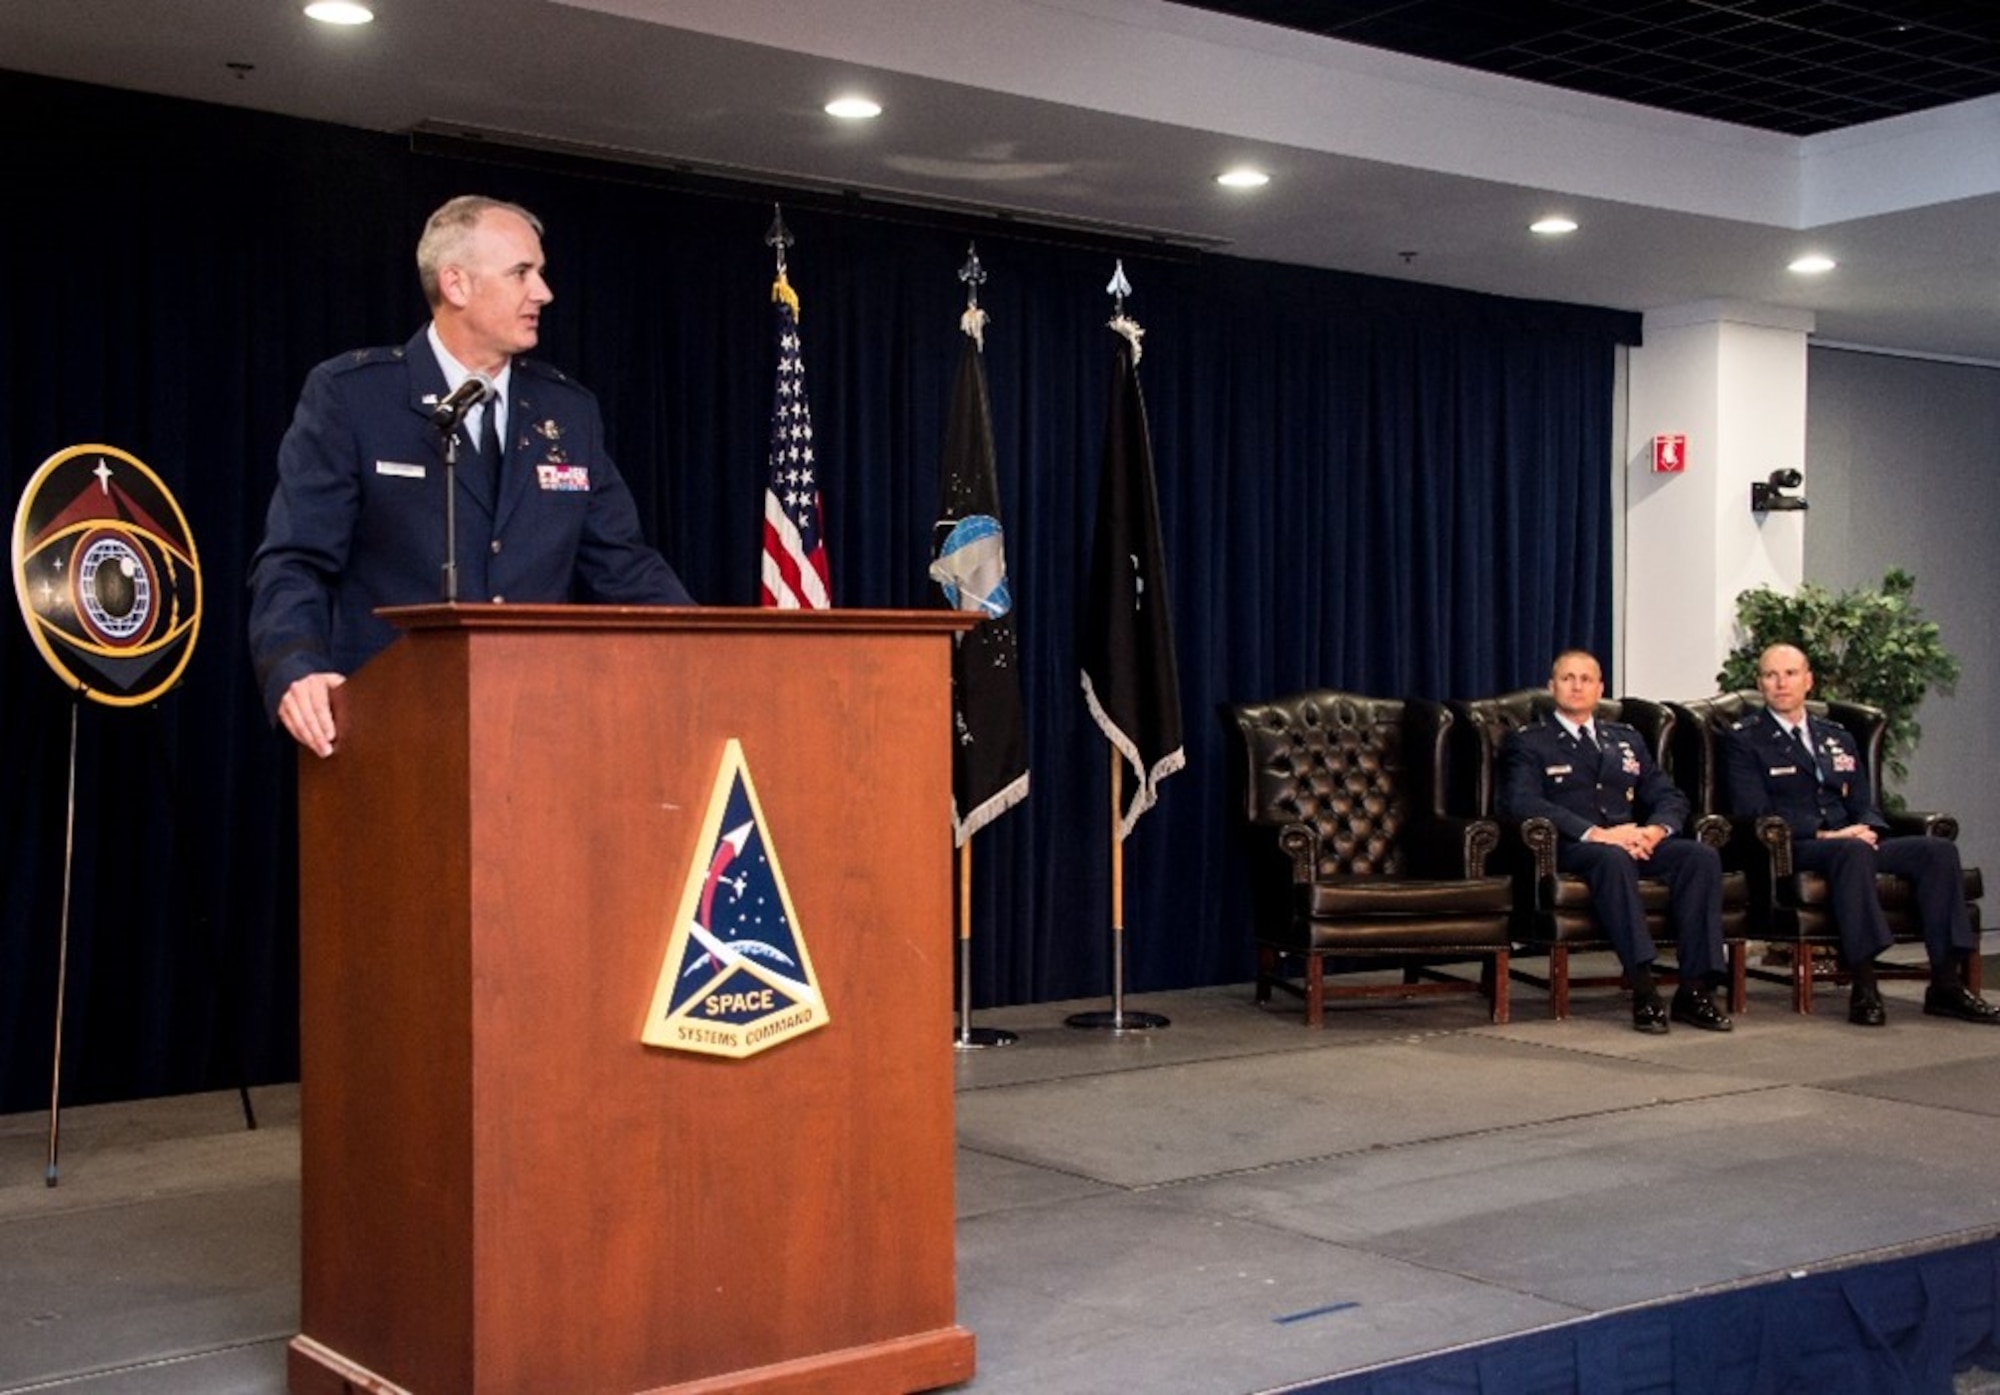 Brig. Gen. Jason Cothern, Space Systems Command, deputy commander, addresses the audience during a change of leadership ceremony where Col. Robert Davis assumes leadership of SSC’s Space Sensing Program Executive Office from Col. Brian Denaro, at SSC headquarters, Los Angeles Air Force Base, California, June 8, 2023. Davis succeeds Col. Brian Denaro, who served as Space Sensing’s PEO once SSC was established as a U.S. Space Force Field Command in August 2021.  (U.S. Space Force photo by Van De Ha)